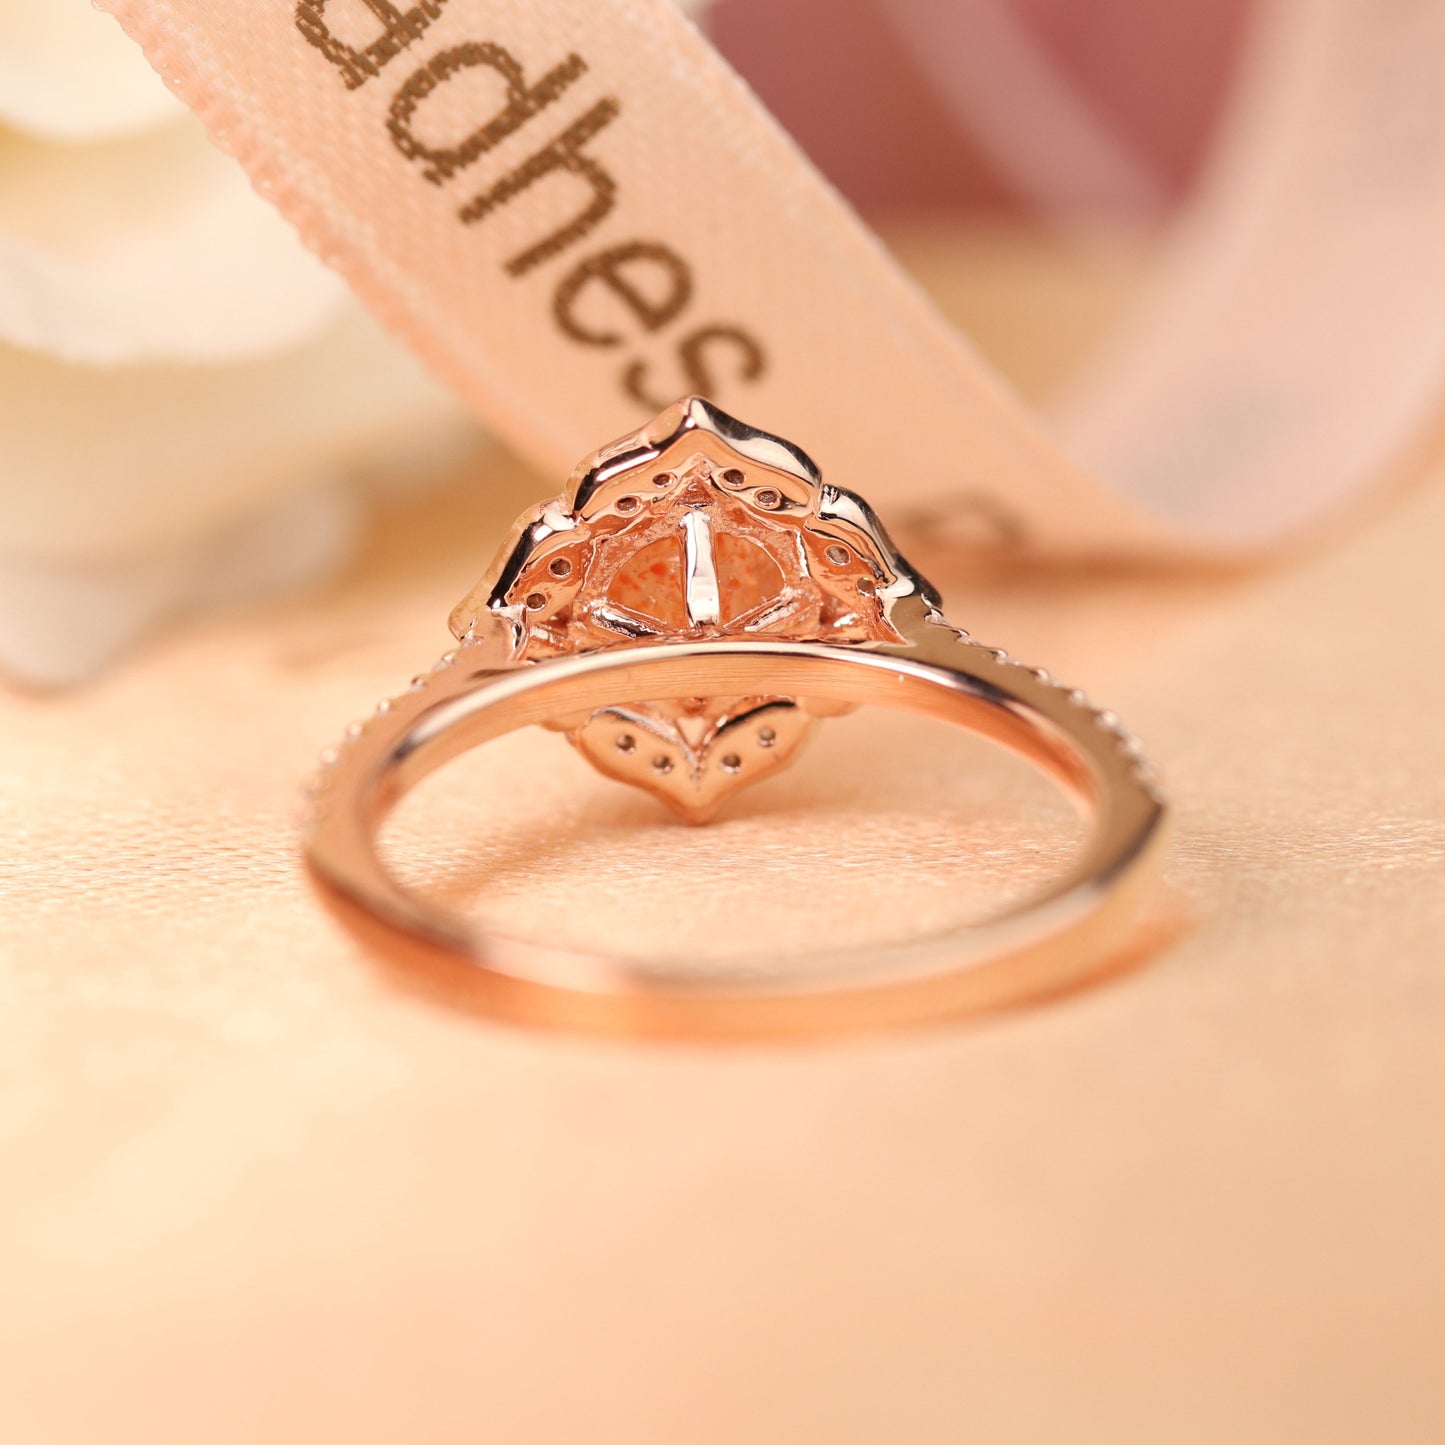 Vintage Flower 1.25 carat Round Cut Strawberry Quartz and Diamond Half-pave Halo Ring for Women in Rose Gold